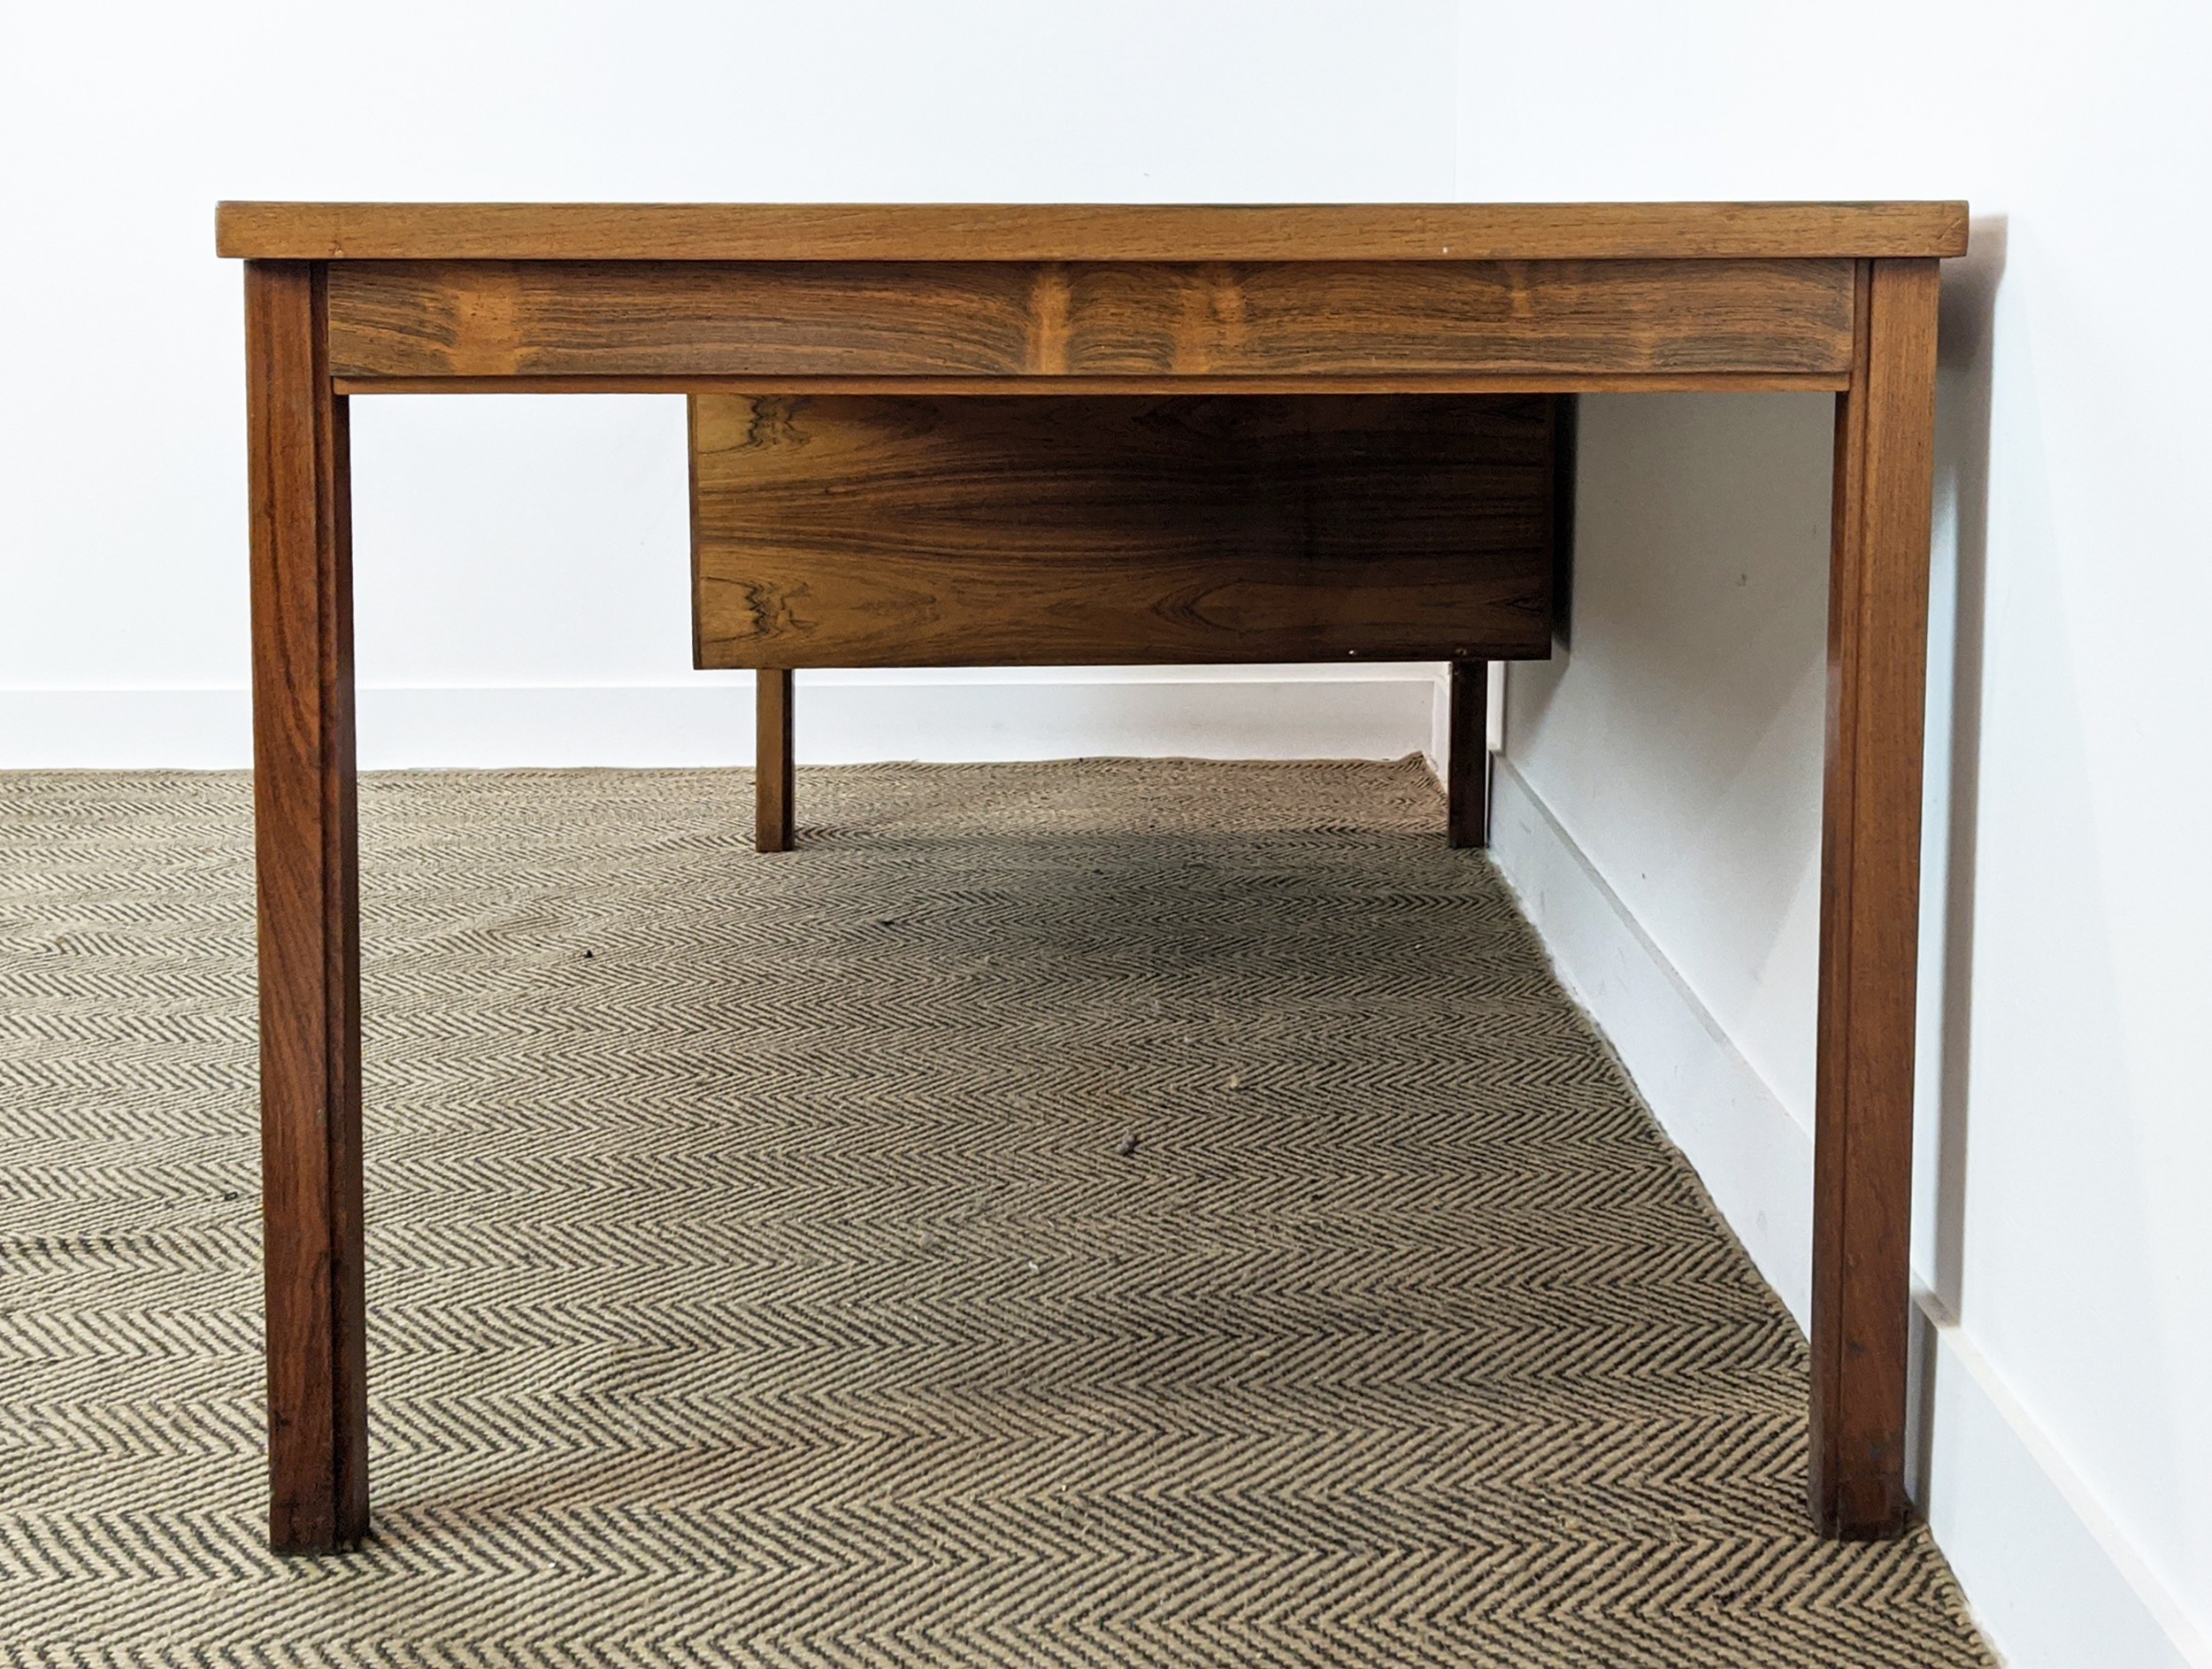 DESK, 171cm x 85.5cm x 73cm approx., with three drawers to one side. - Image 5 of 14